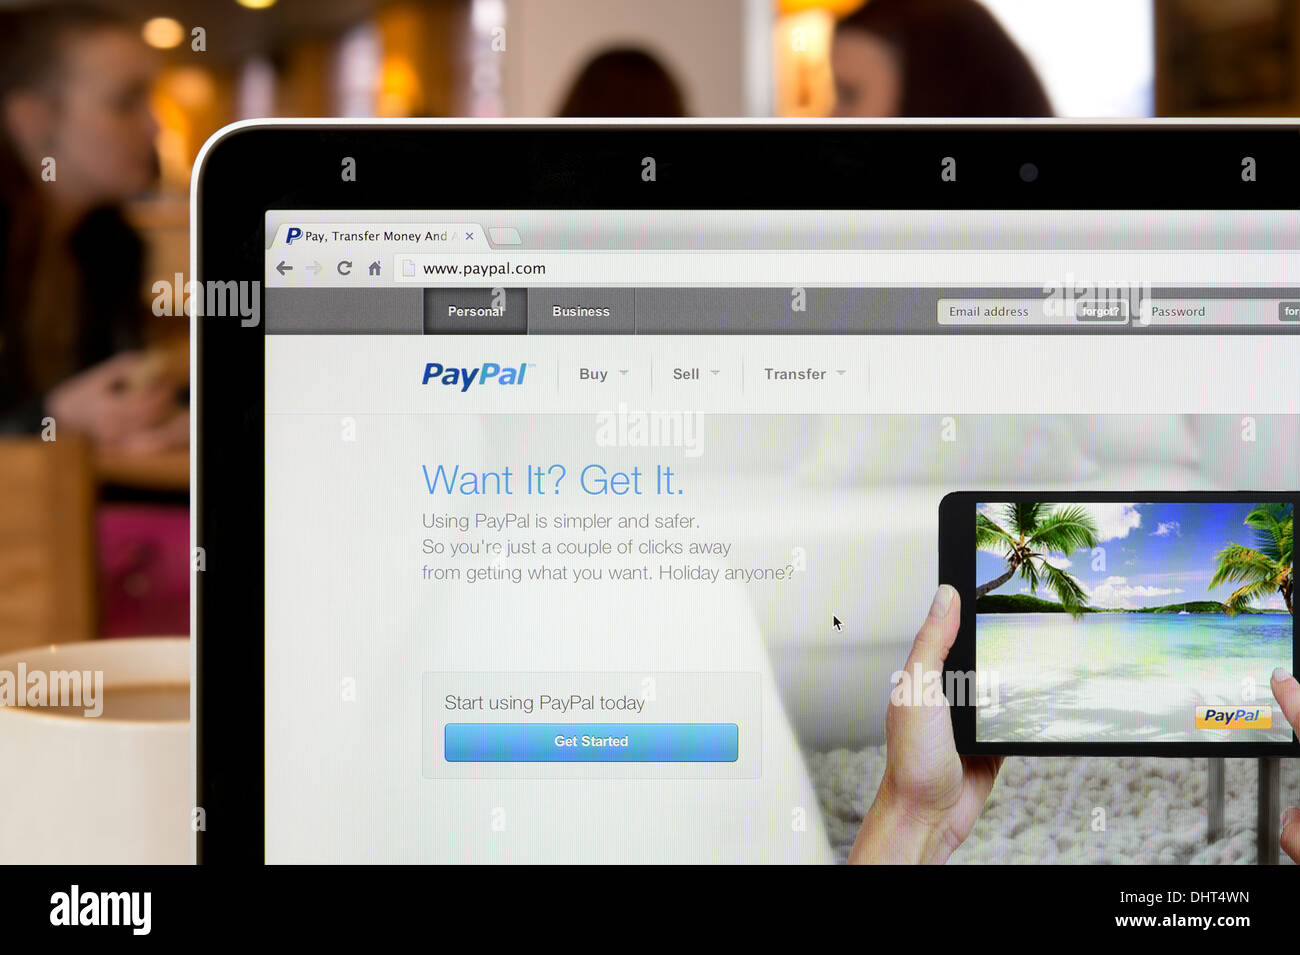 The PayPal website shot in a coffee shop environment (Editorial use only: ­print, TV, e-book and editorial website). Stock Photo